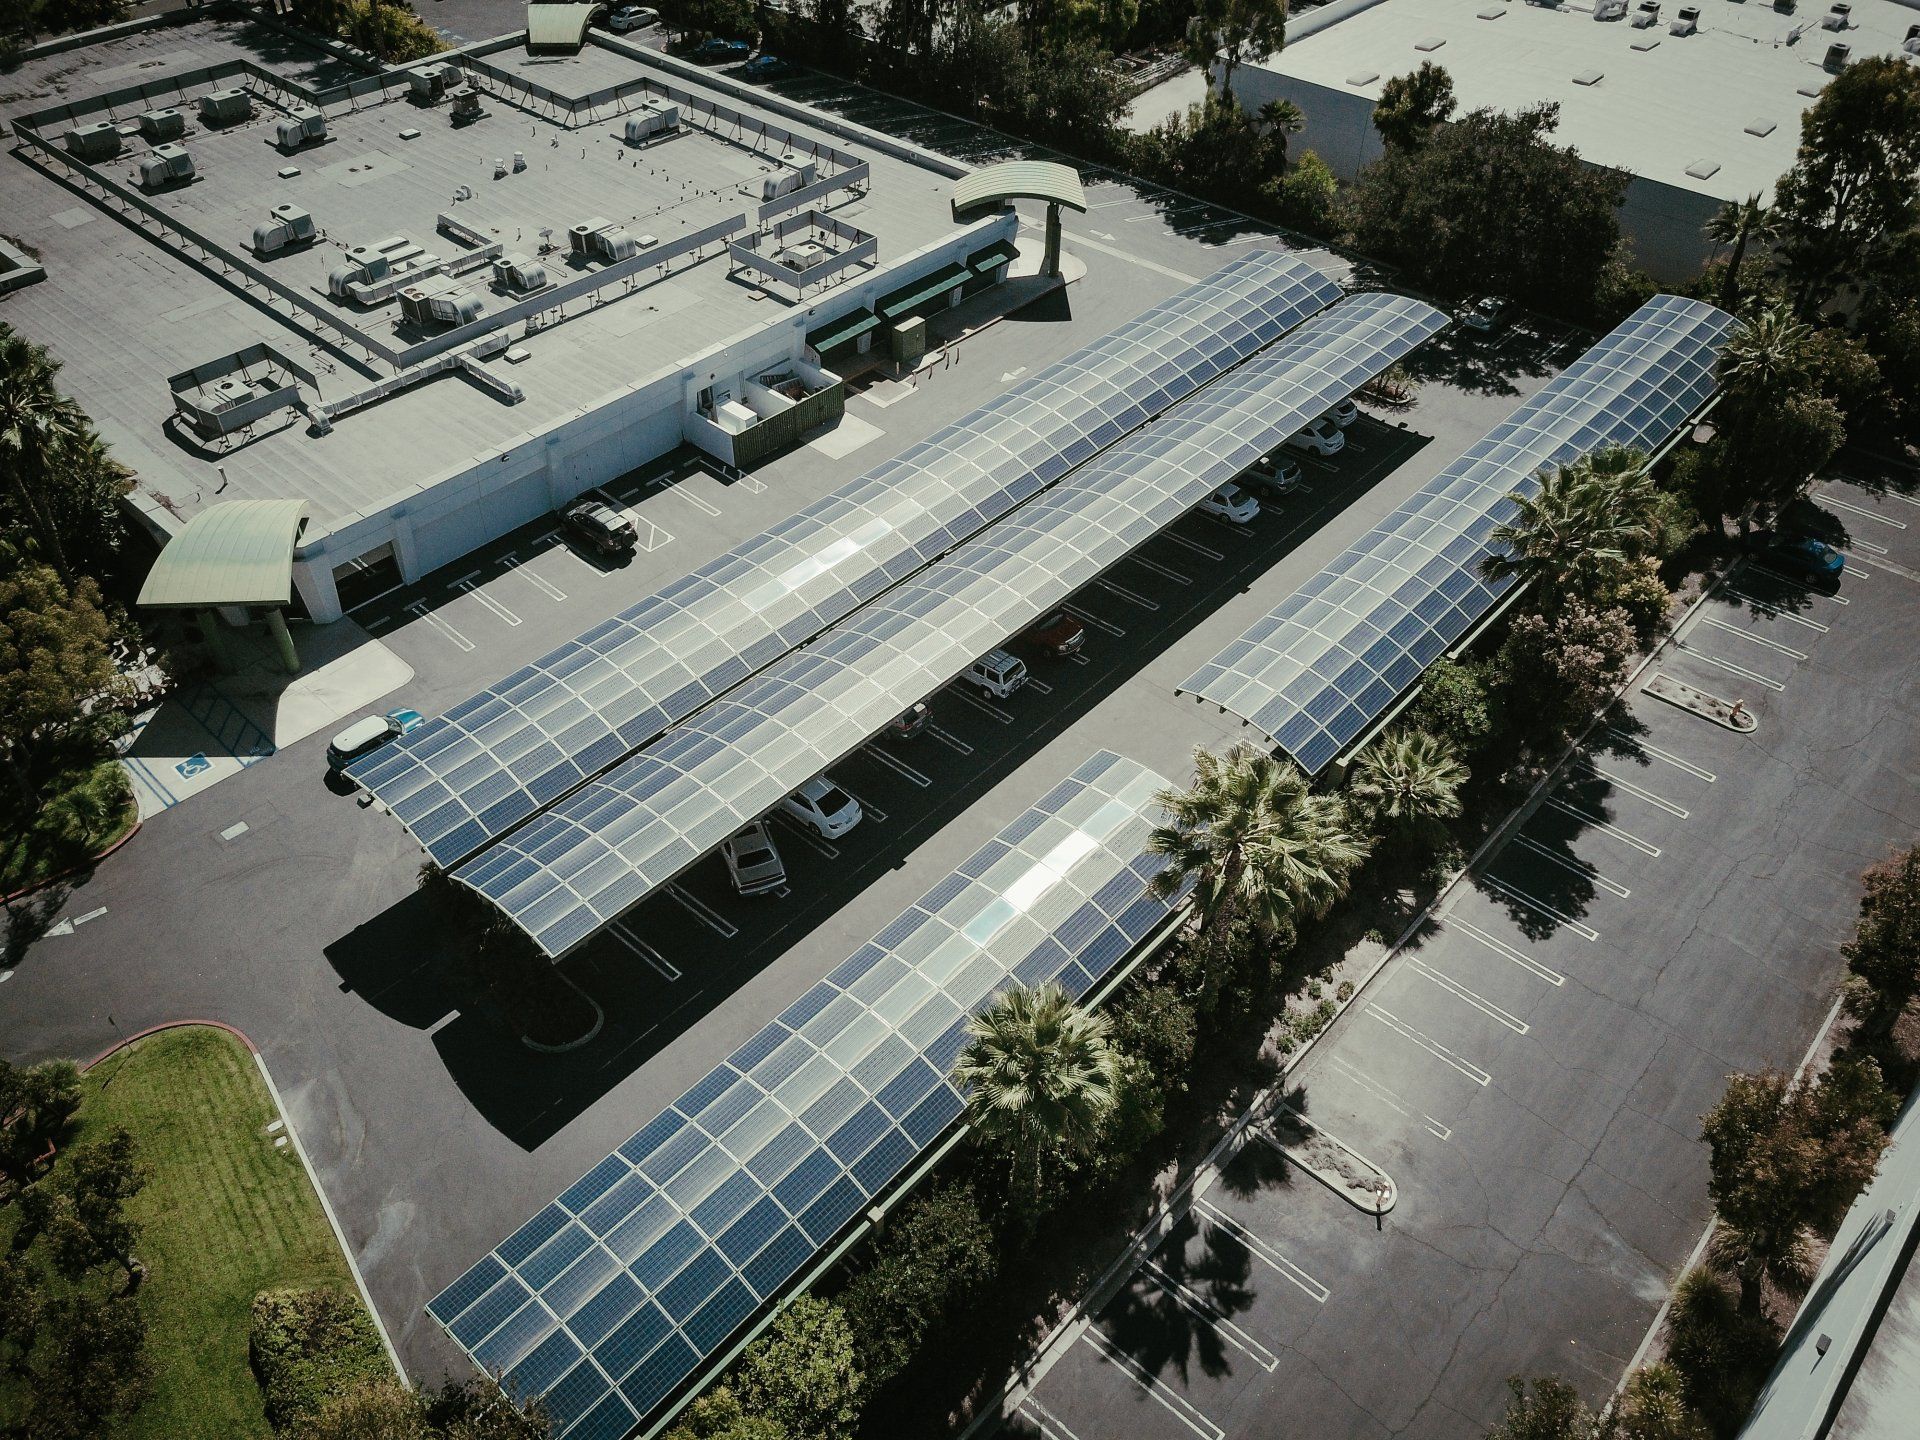 Overhead view of a manufacturing facility with solar panels installed on their car ports